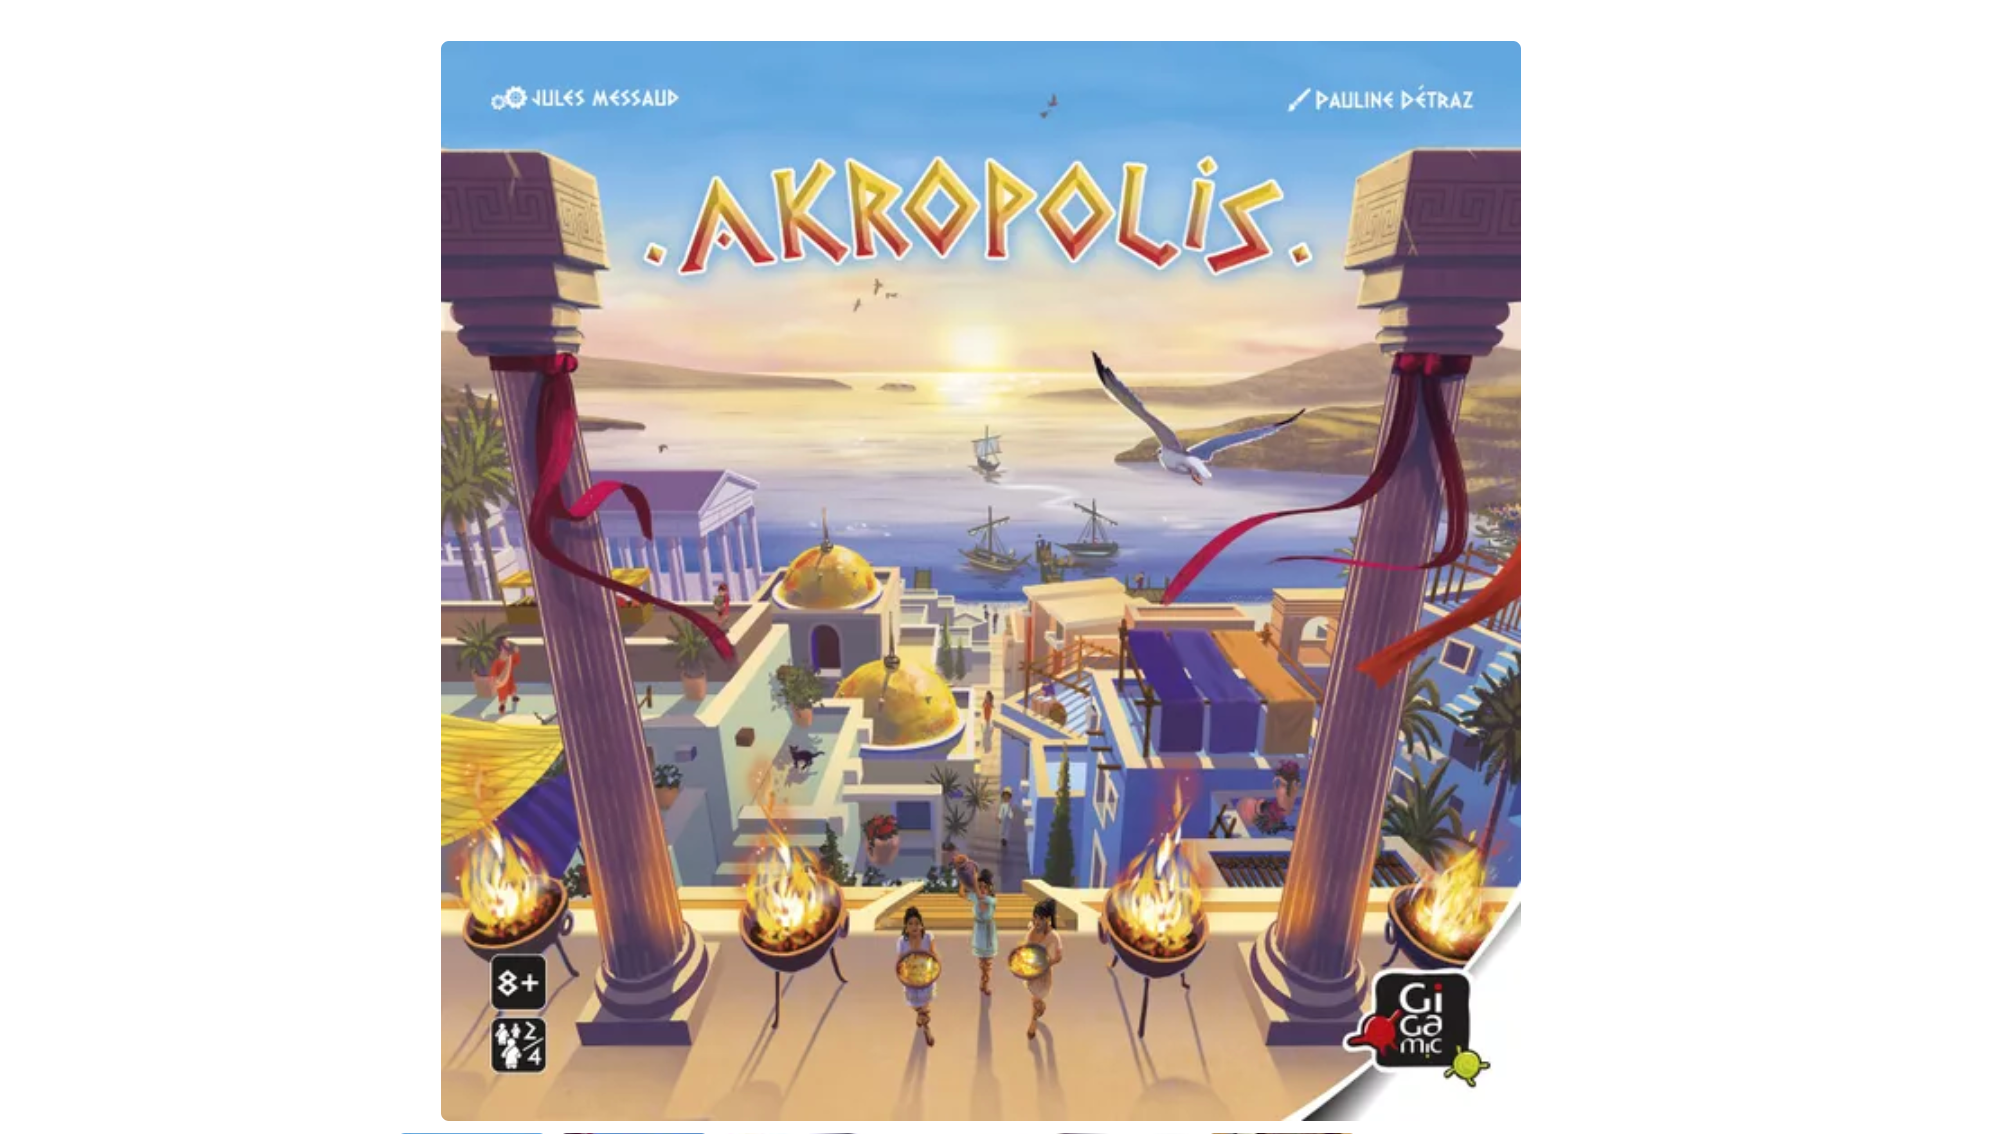 akropolis #gigamic #tuiles #article #review